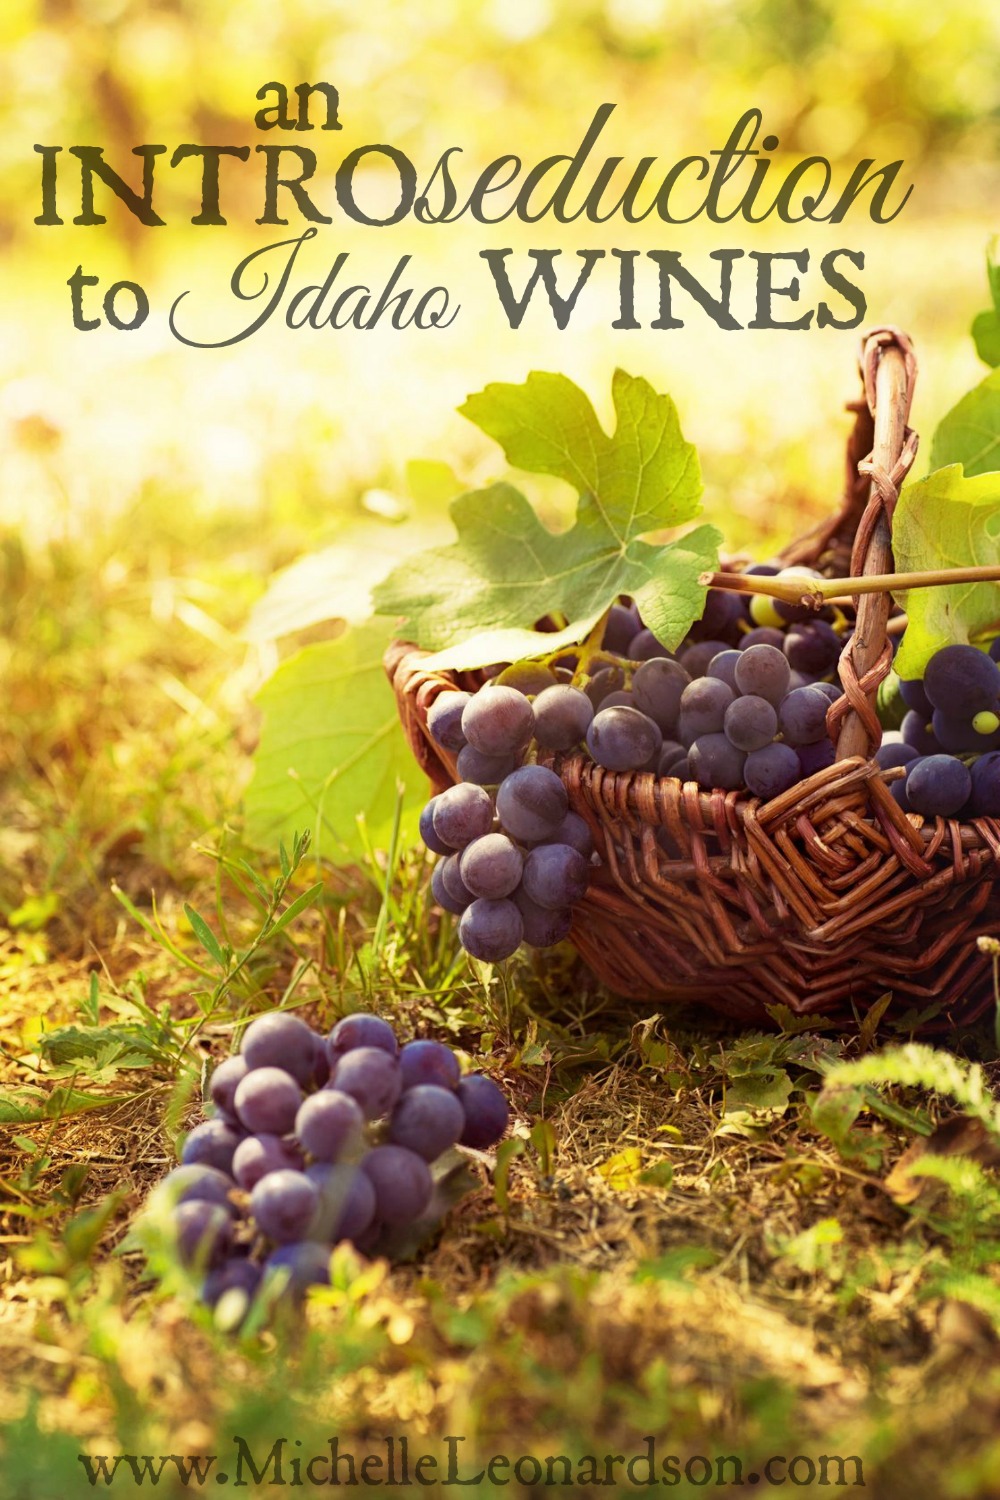 Let me intro–seduce–you to Idaho wines! The Idaho wine industry is growing and people are starting to notice. Find out more about this burgeoning wine industry and let me persuade you to to drink Idaho wine! 